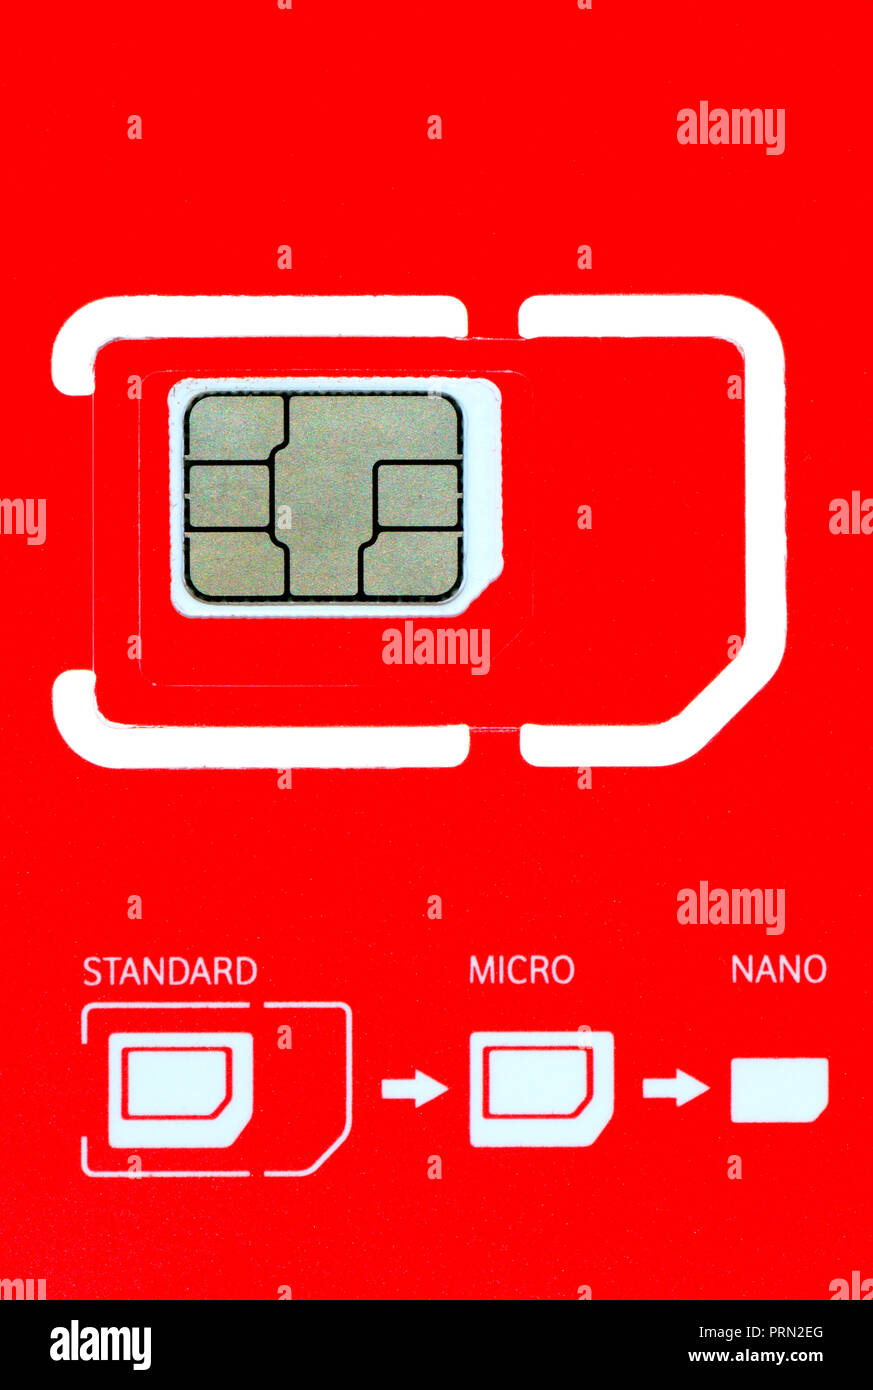 Telephone Sim card showing different sizes - standard, micro and nano Stock Photo